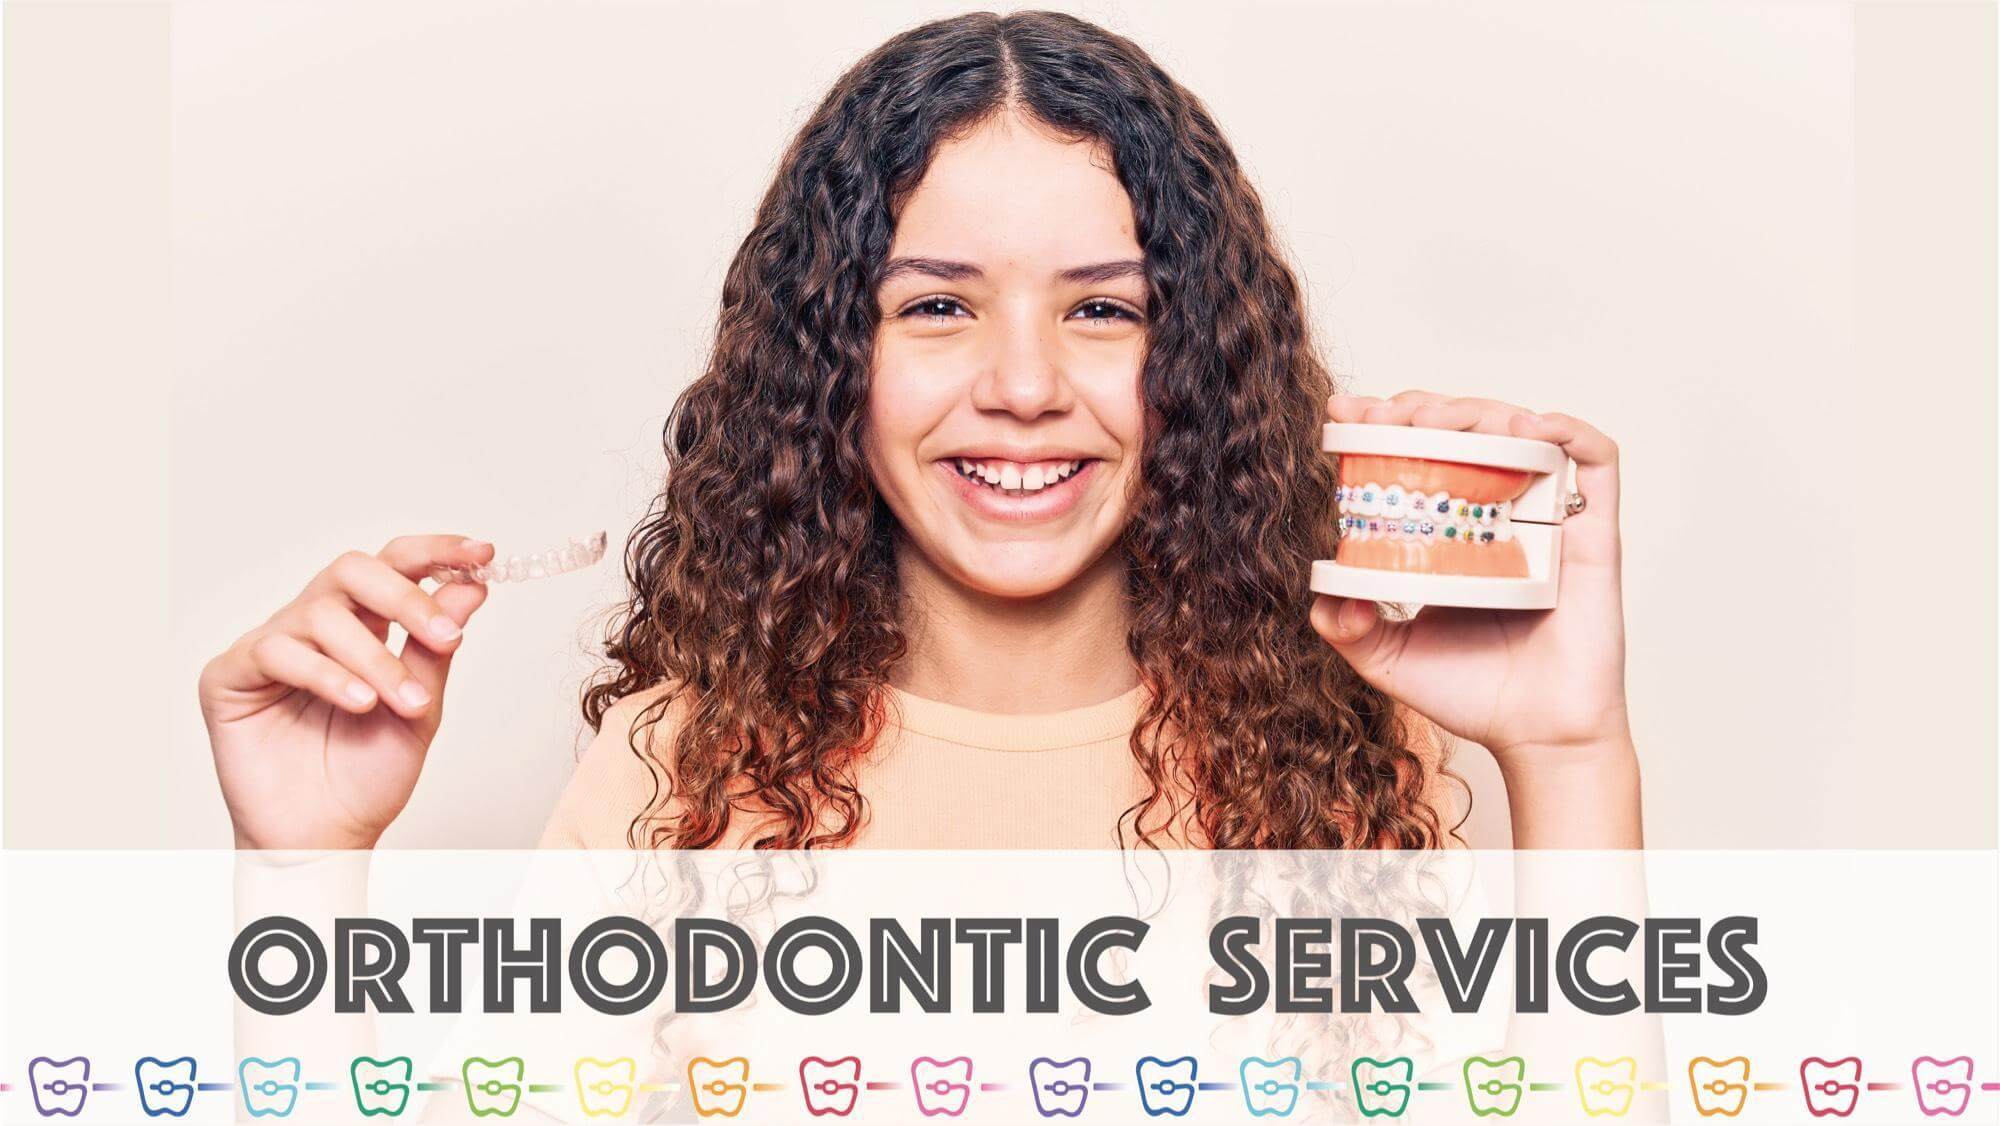 OrthoBoutique - a curley woman smiling holding a fake teeth with braces and a clear aligner